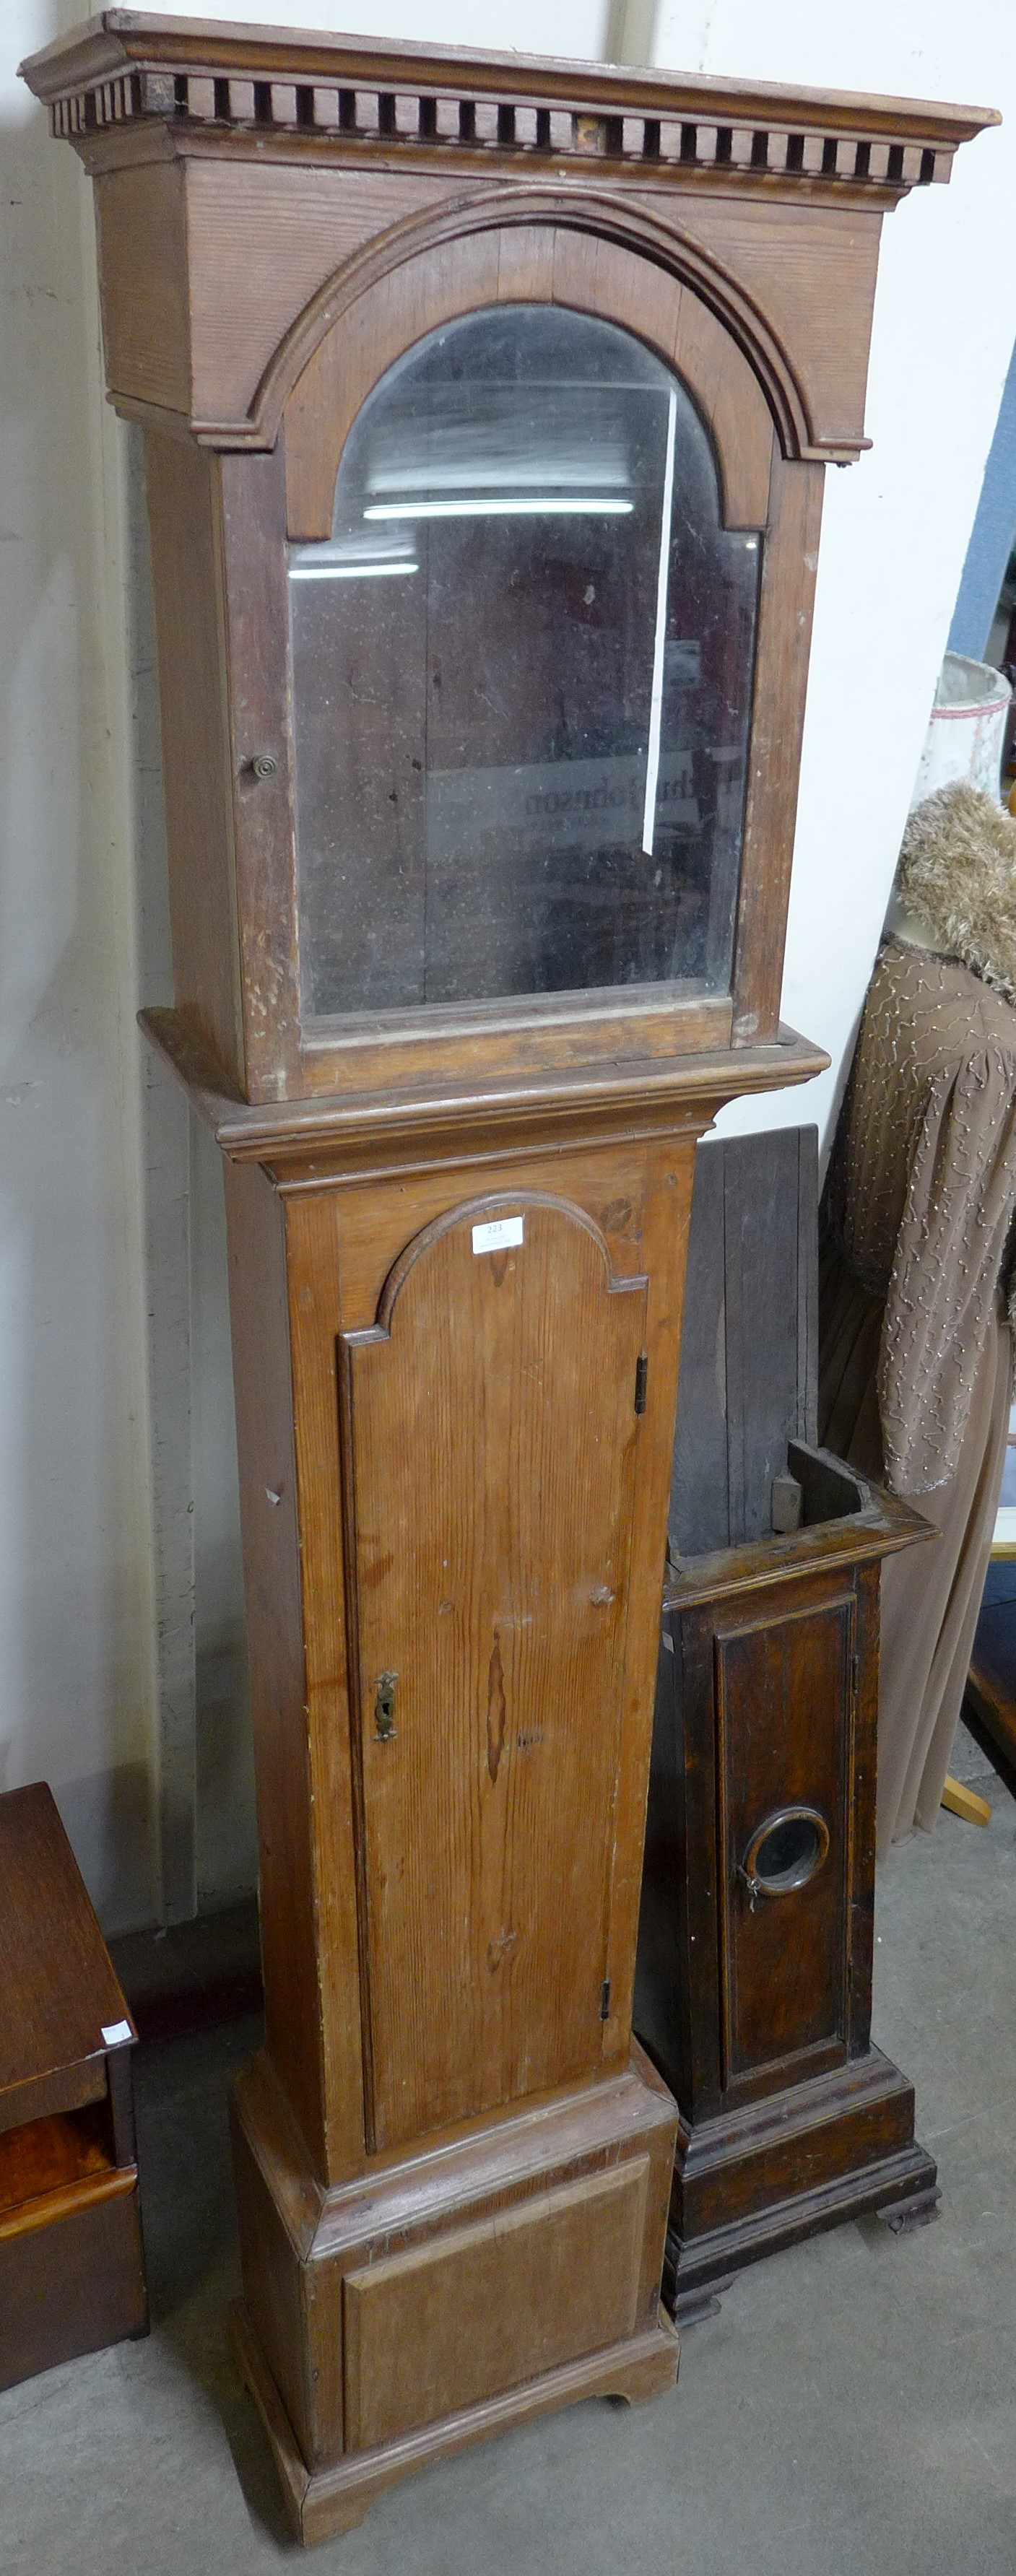 An early 18th Century pine longcase clock case and a 17th Century oak dwarf cased clock case